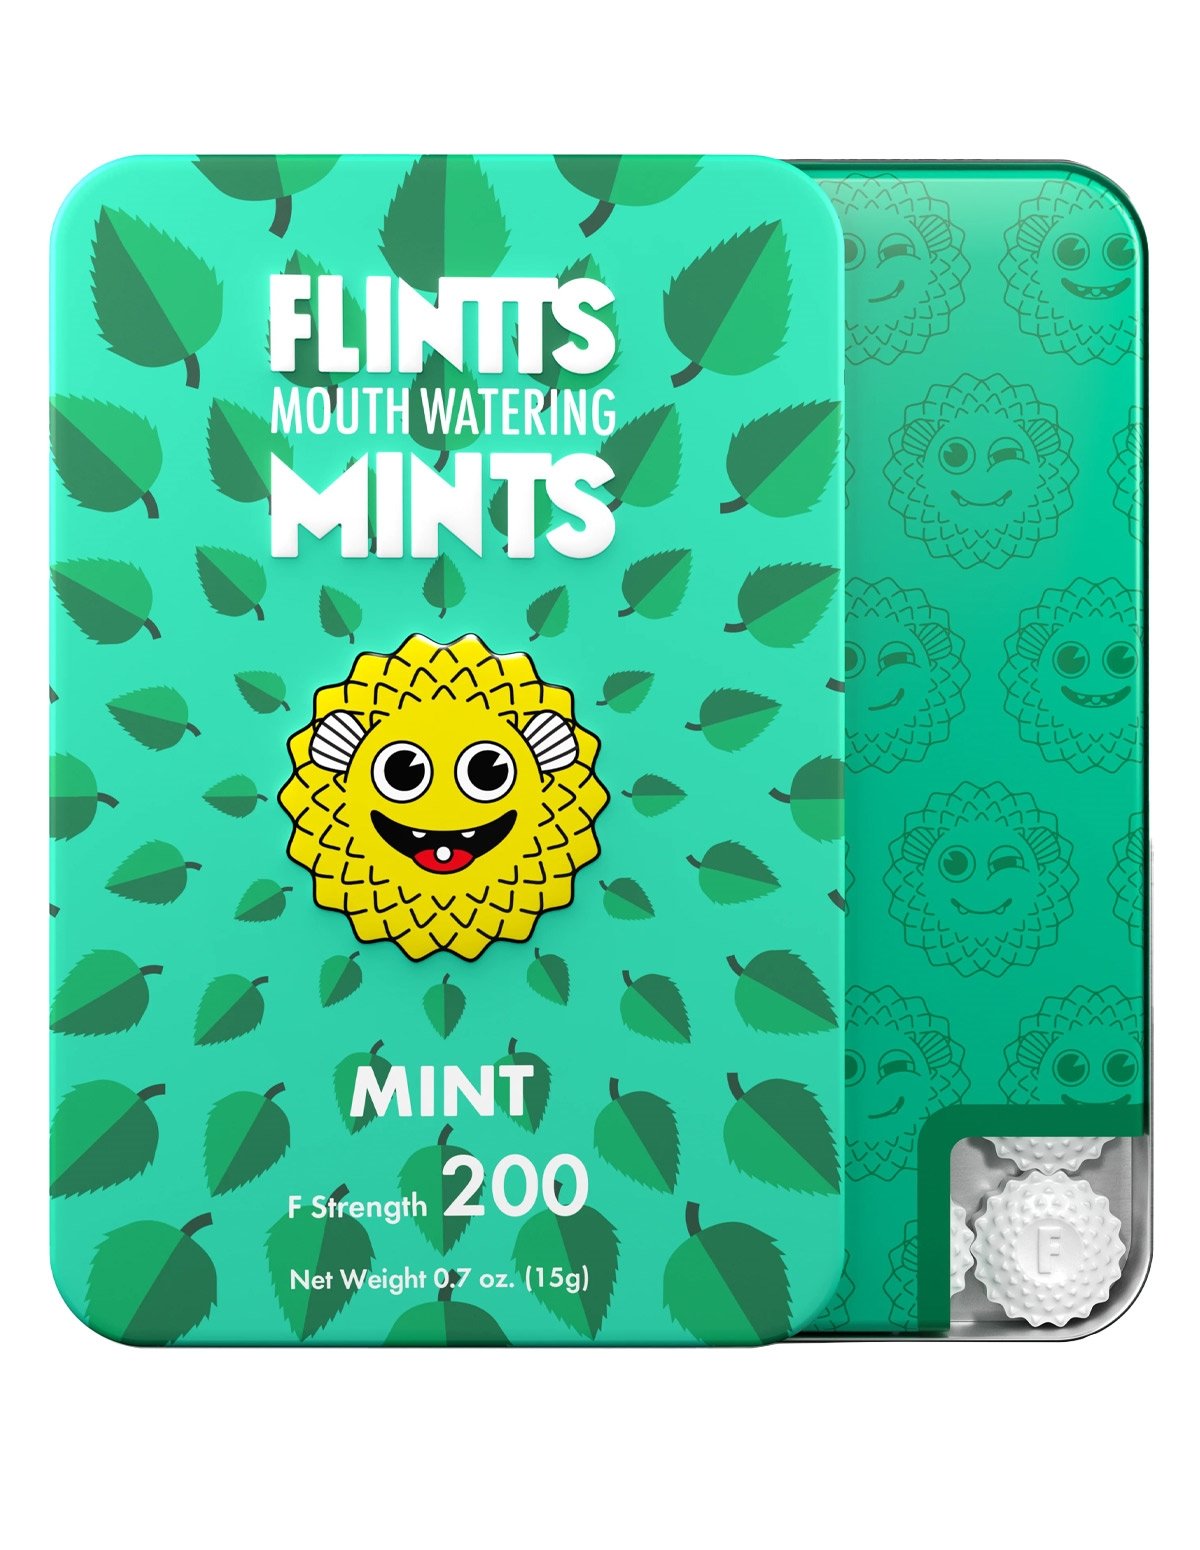 alternate image for Flintts Mints Mouth Watering - Mint Strength 200